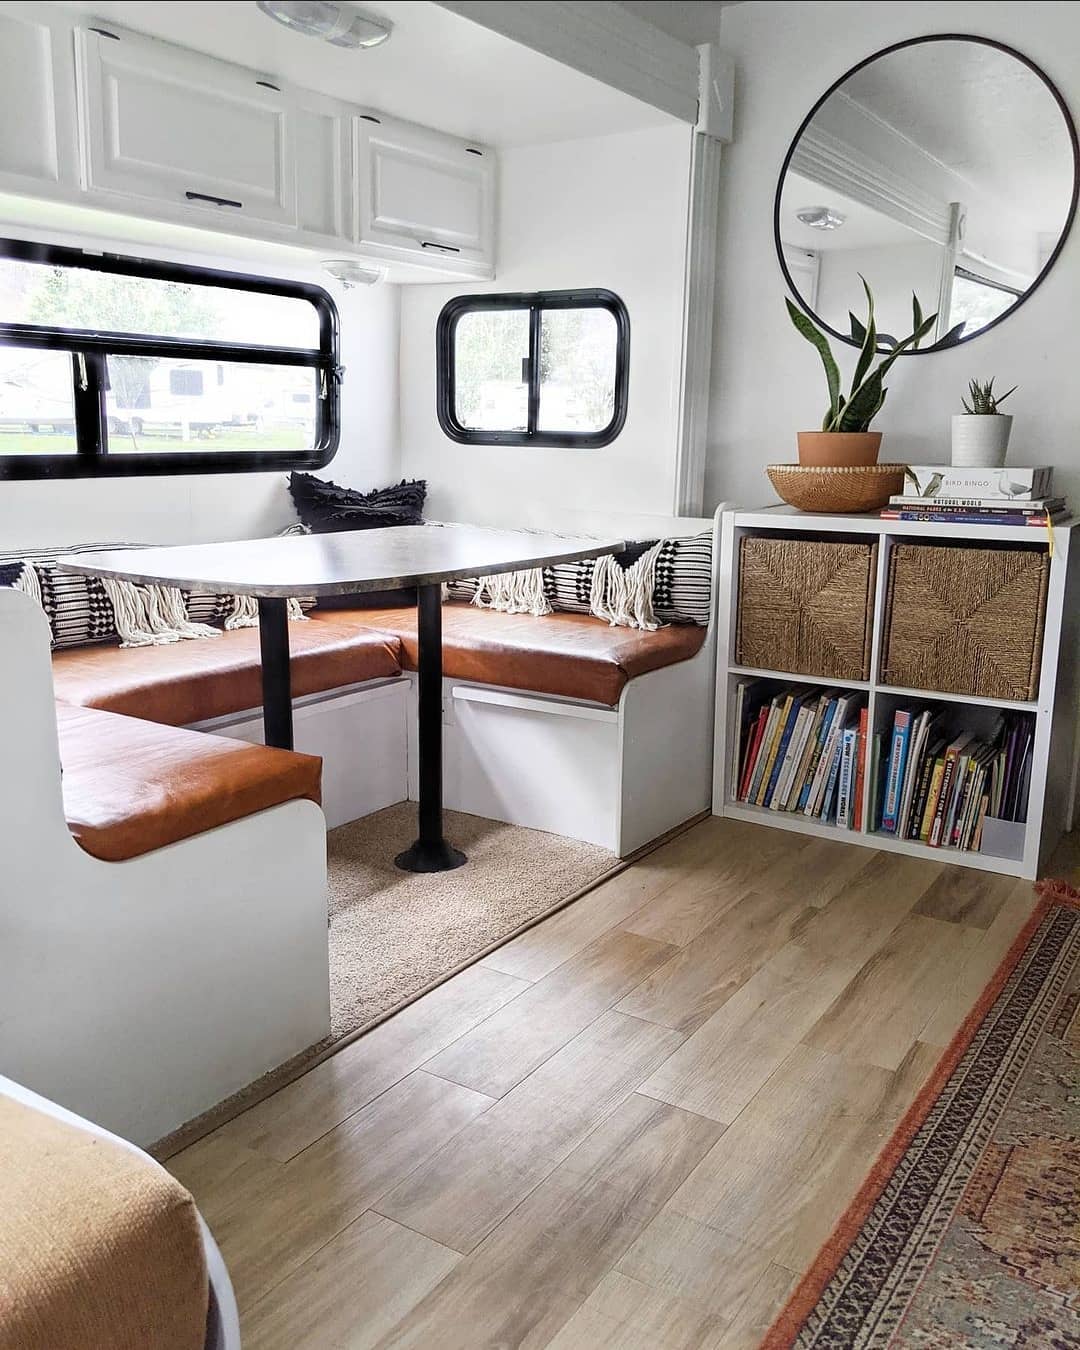 RV dining area featuring storage opportunities under the benches. Photo by Instagram user @thedekkertrekkers.